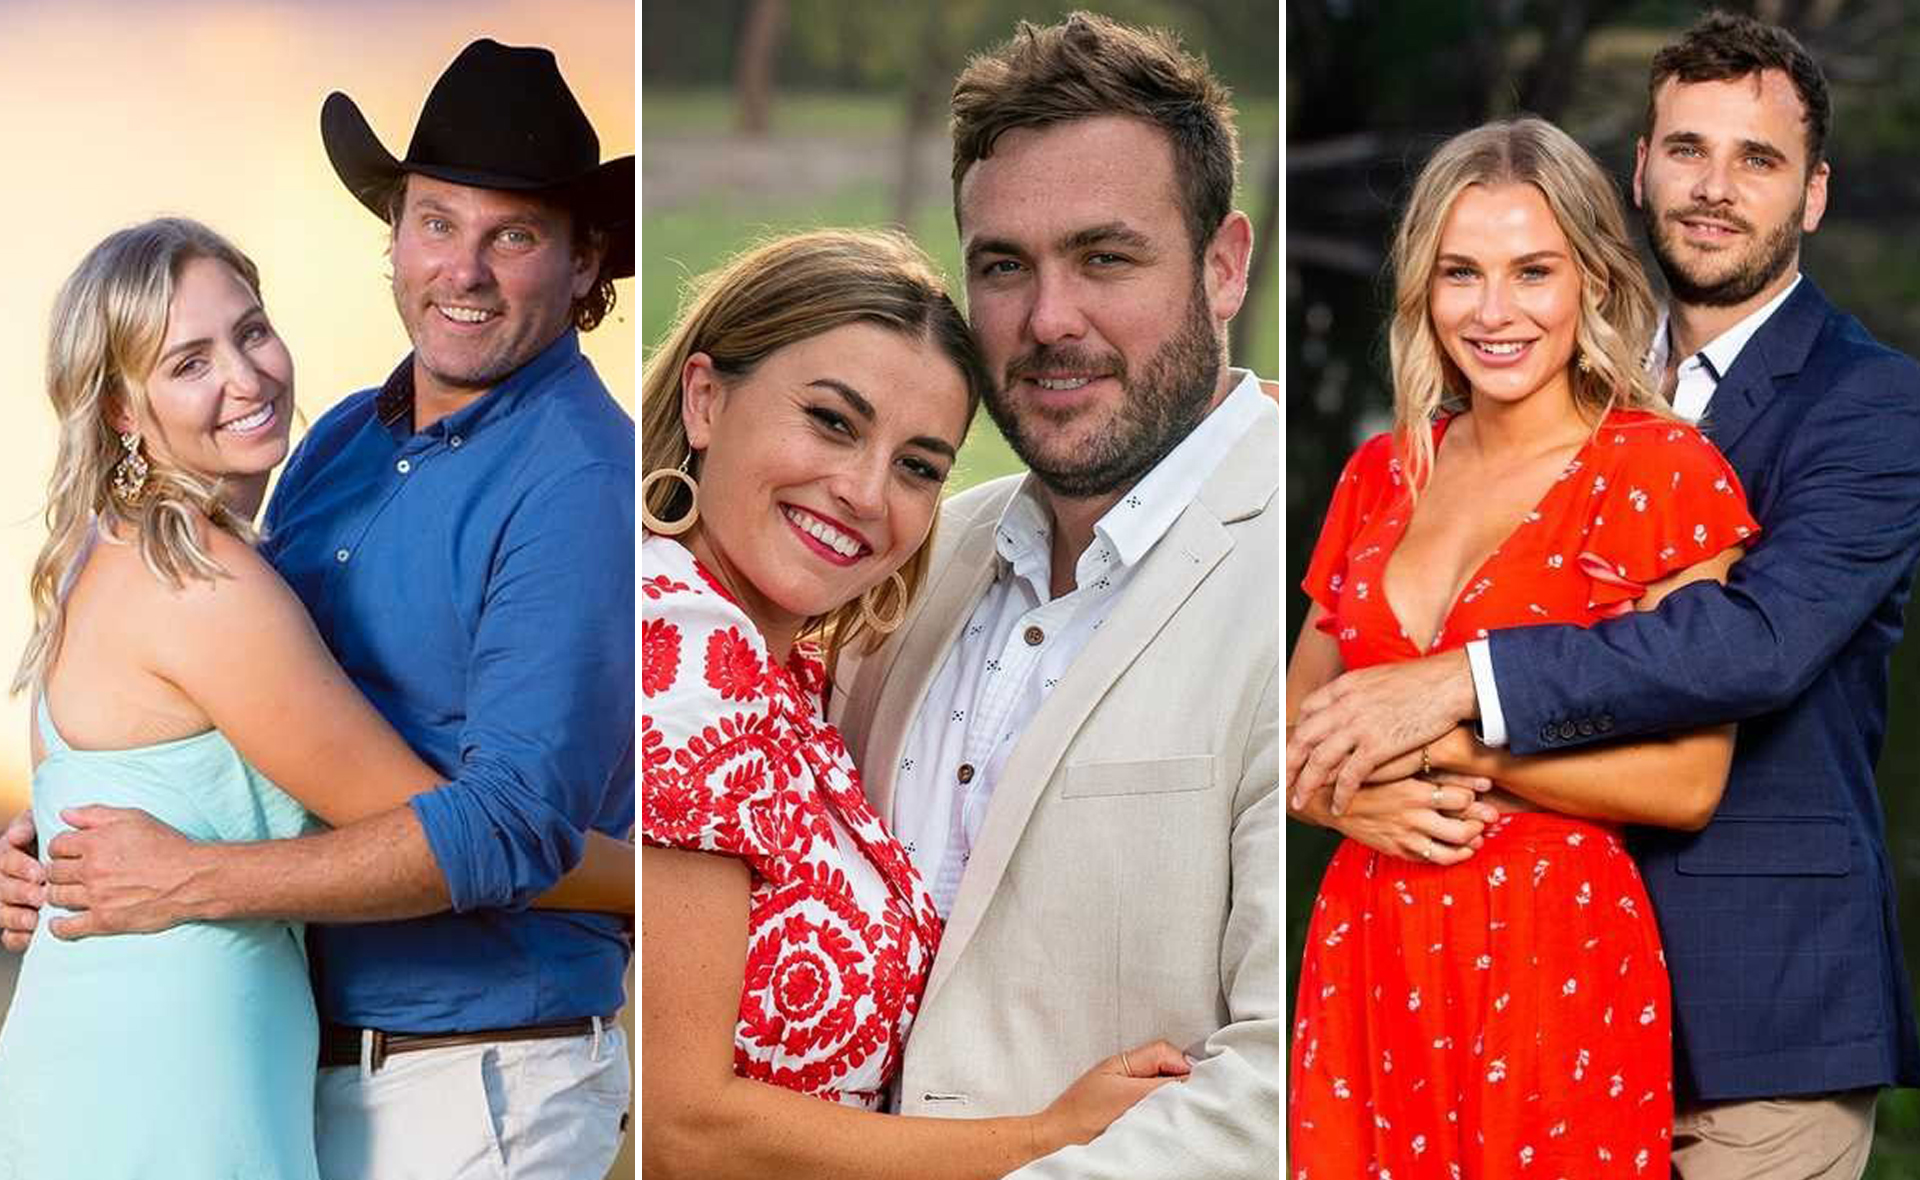 A marriage proposal and a shock reveal – here’s what we know about the Farmer Wants A Wife reunion so far